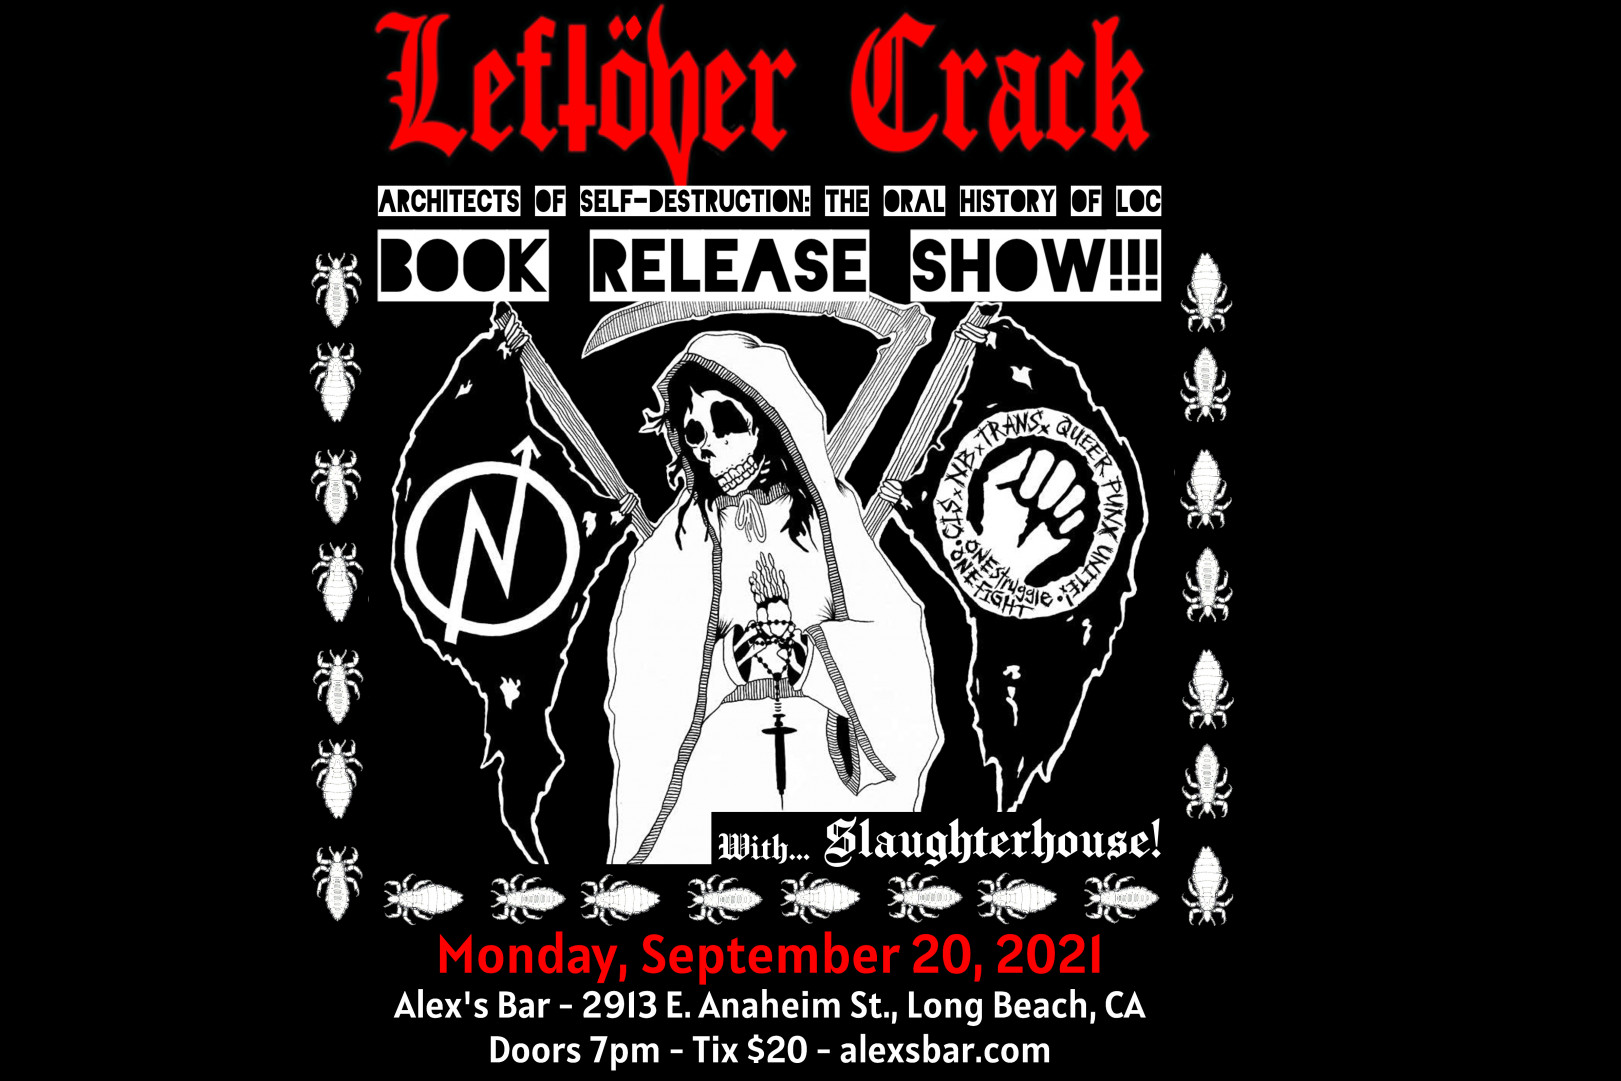 Leftover Crack to play Book Release Show, first gig in 666 days!